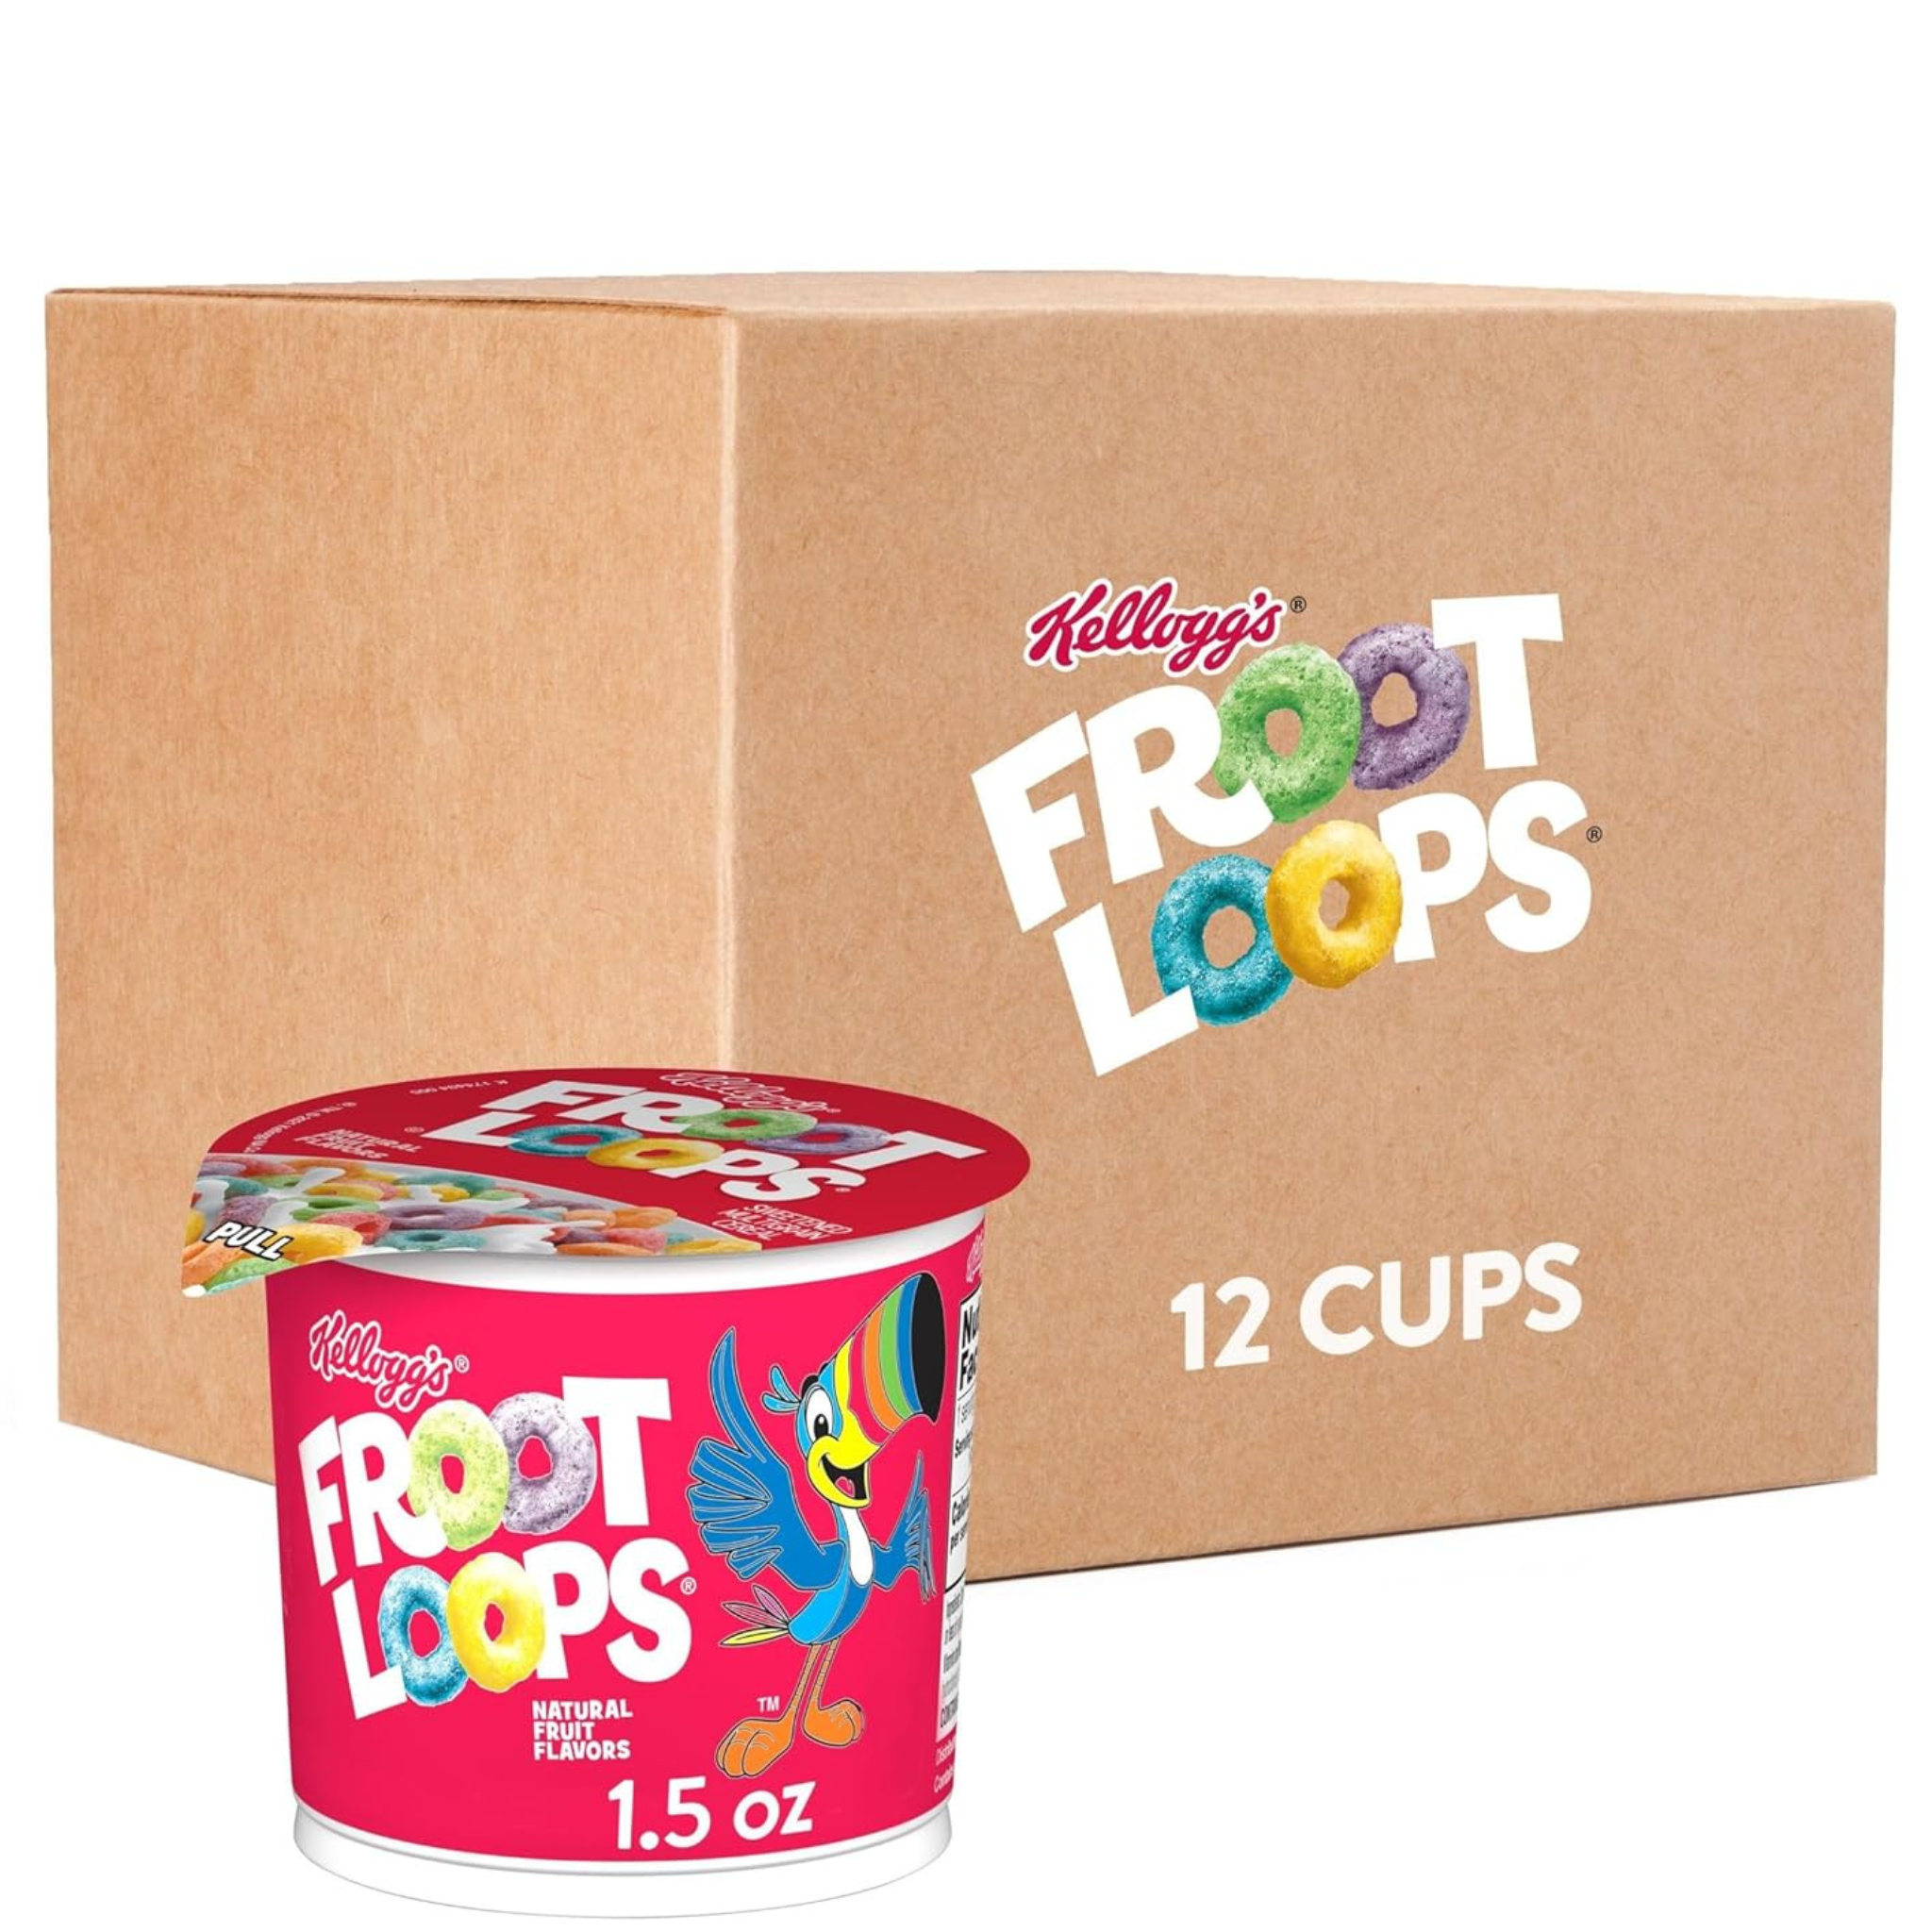 Kellogg’s Froot Loops Cereal Cups, 12 Cups